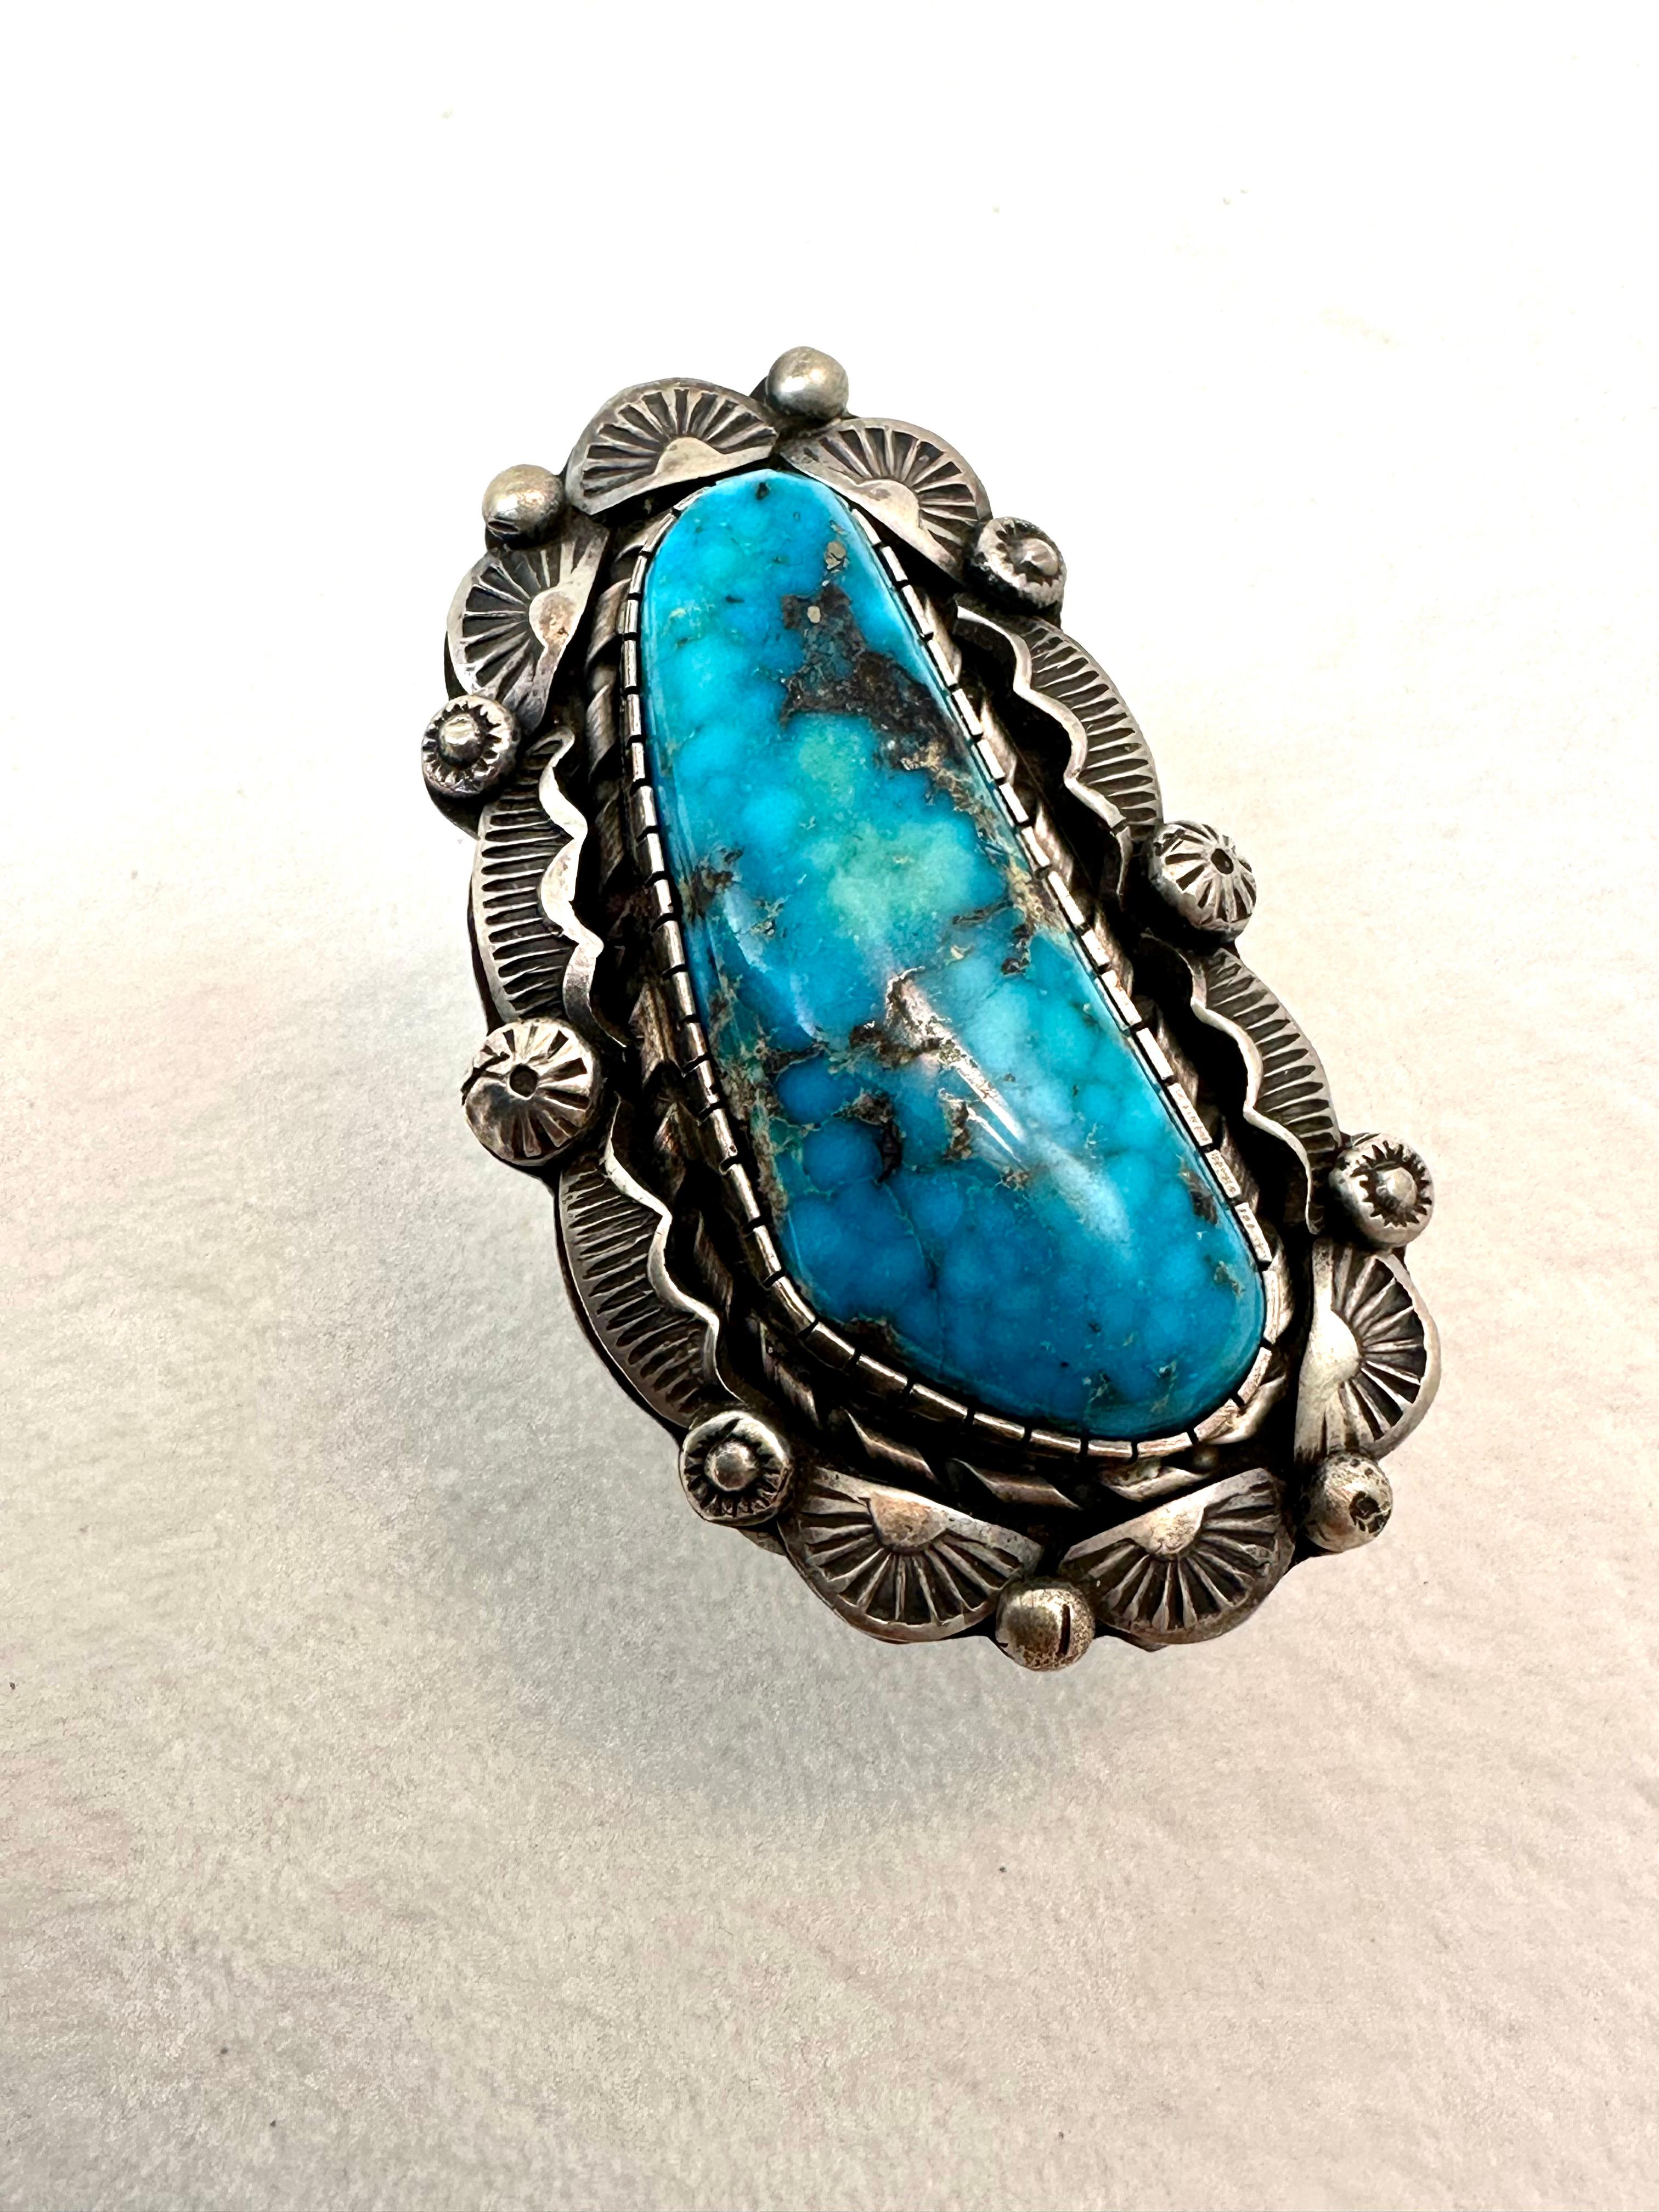 Native American Navajo Artist Betta Lee ~ Sterling Silver .925 Kingman Turquoise Ring Size 8 For Sale